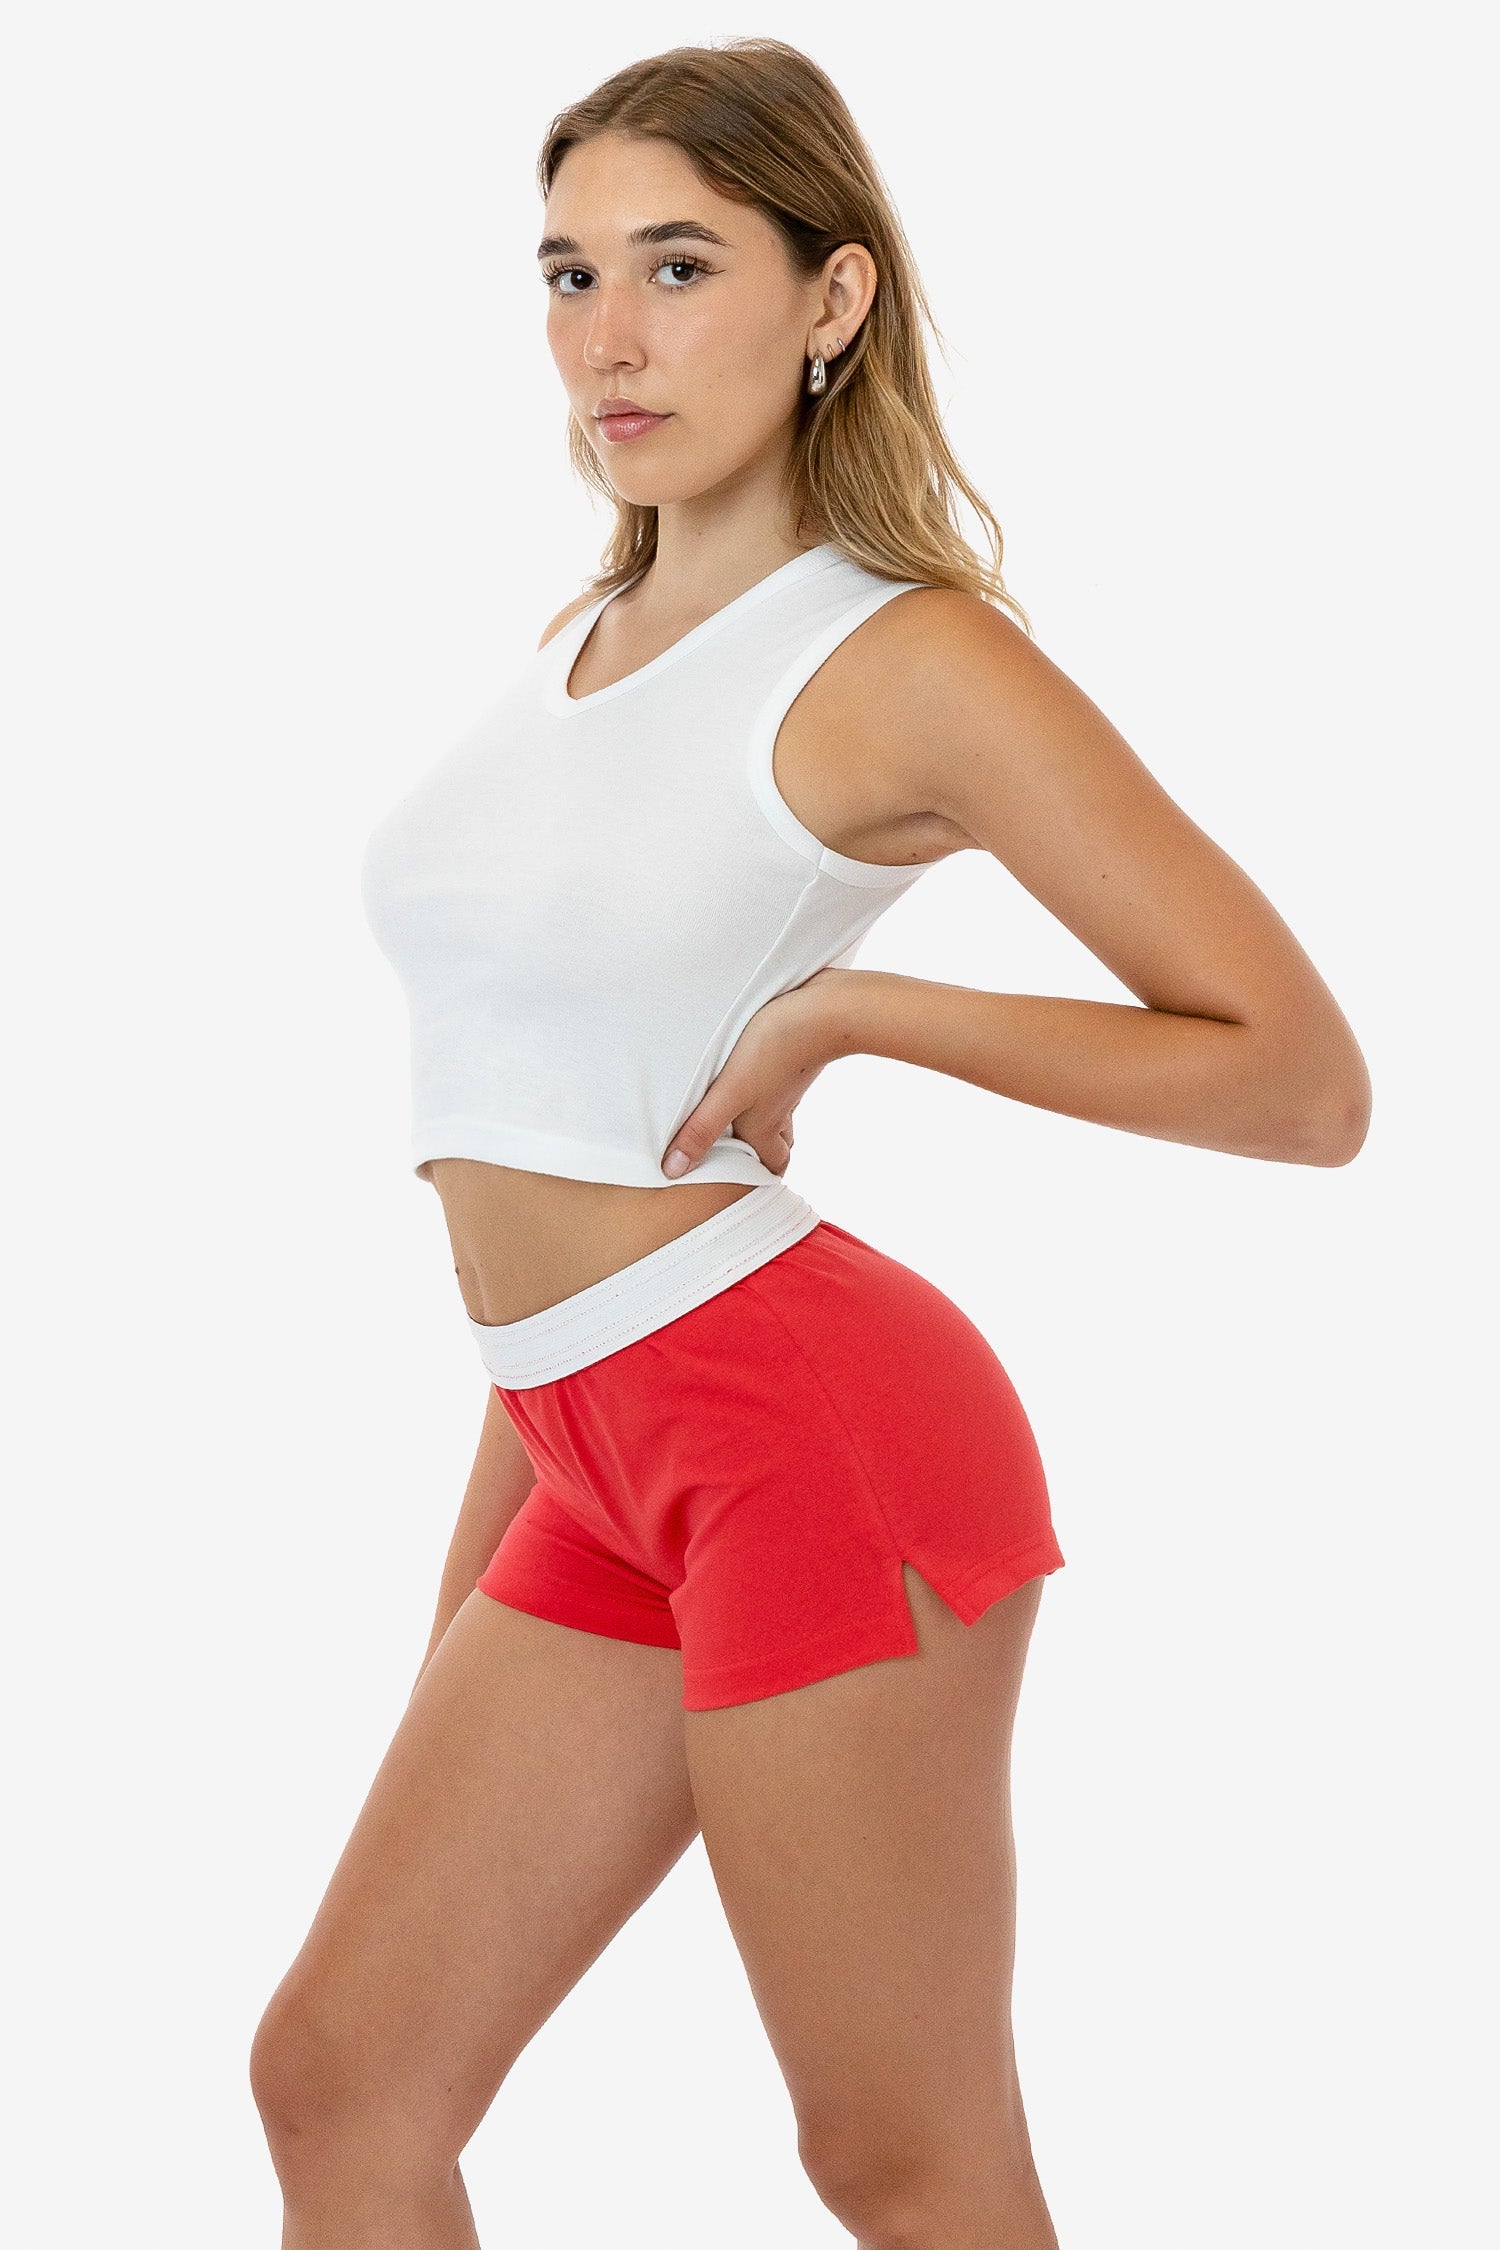 Ladies Sport Shorts at Rs 135/piece(s)